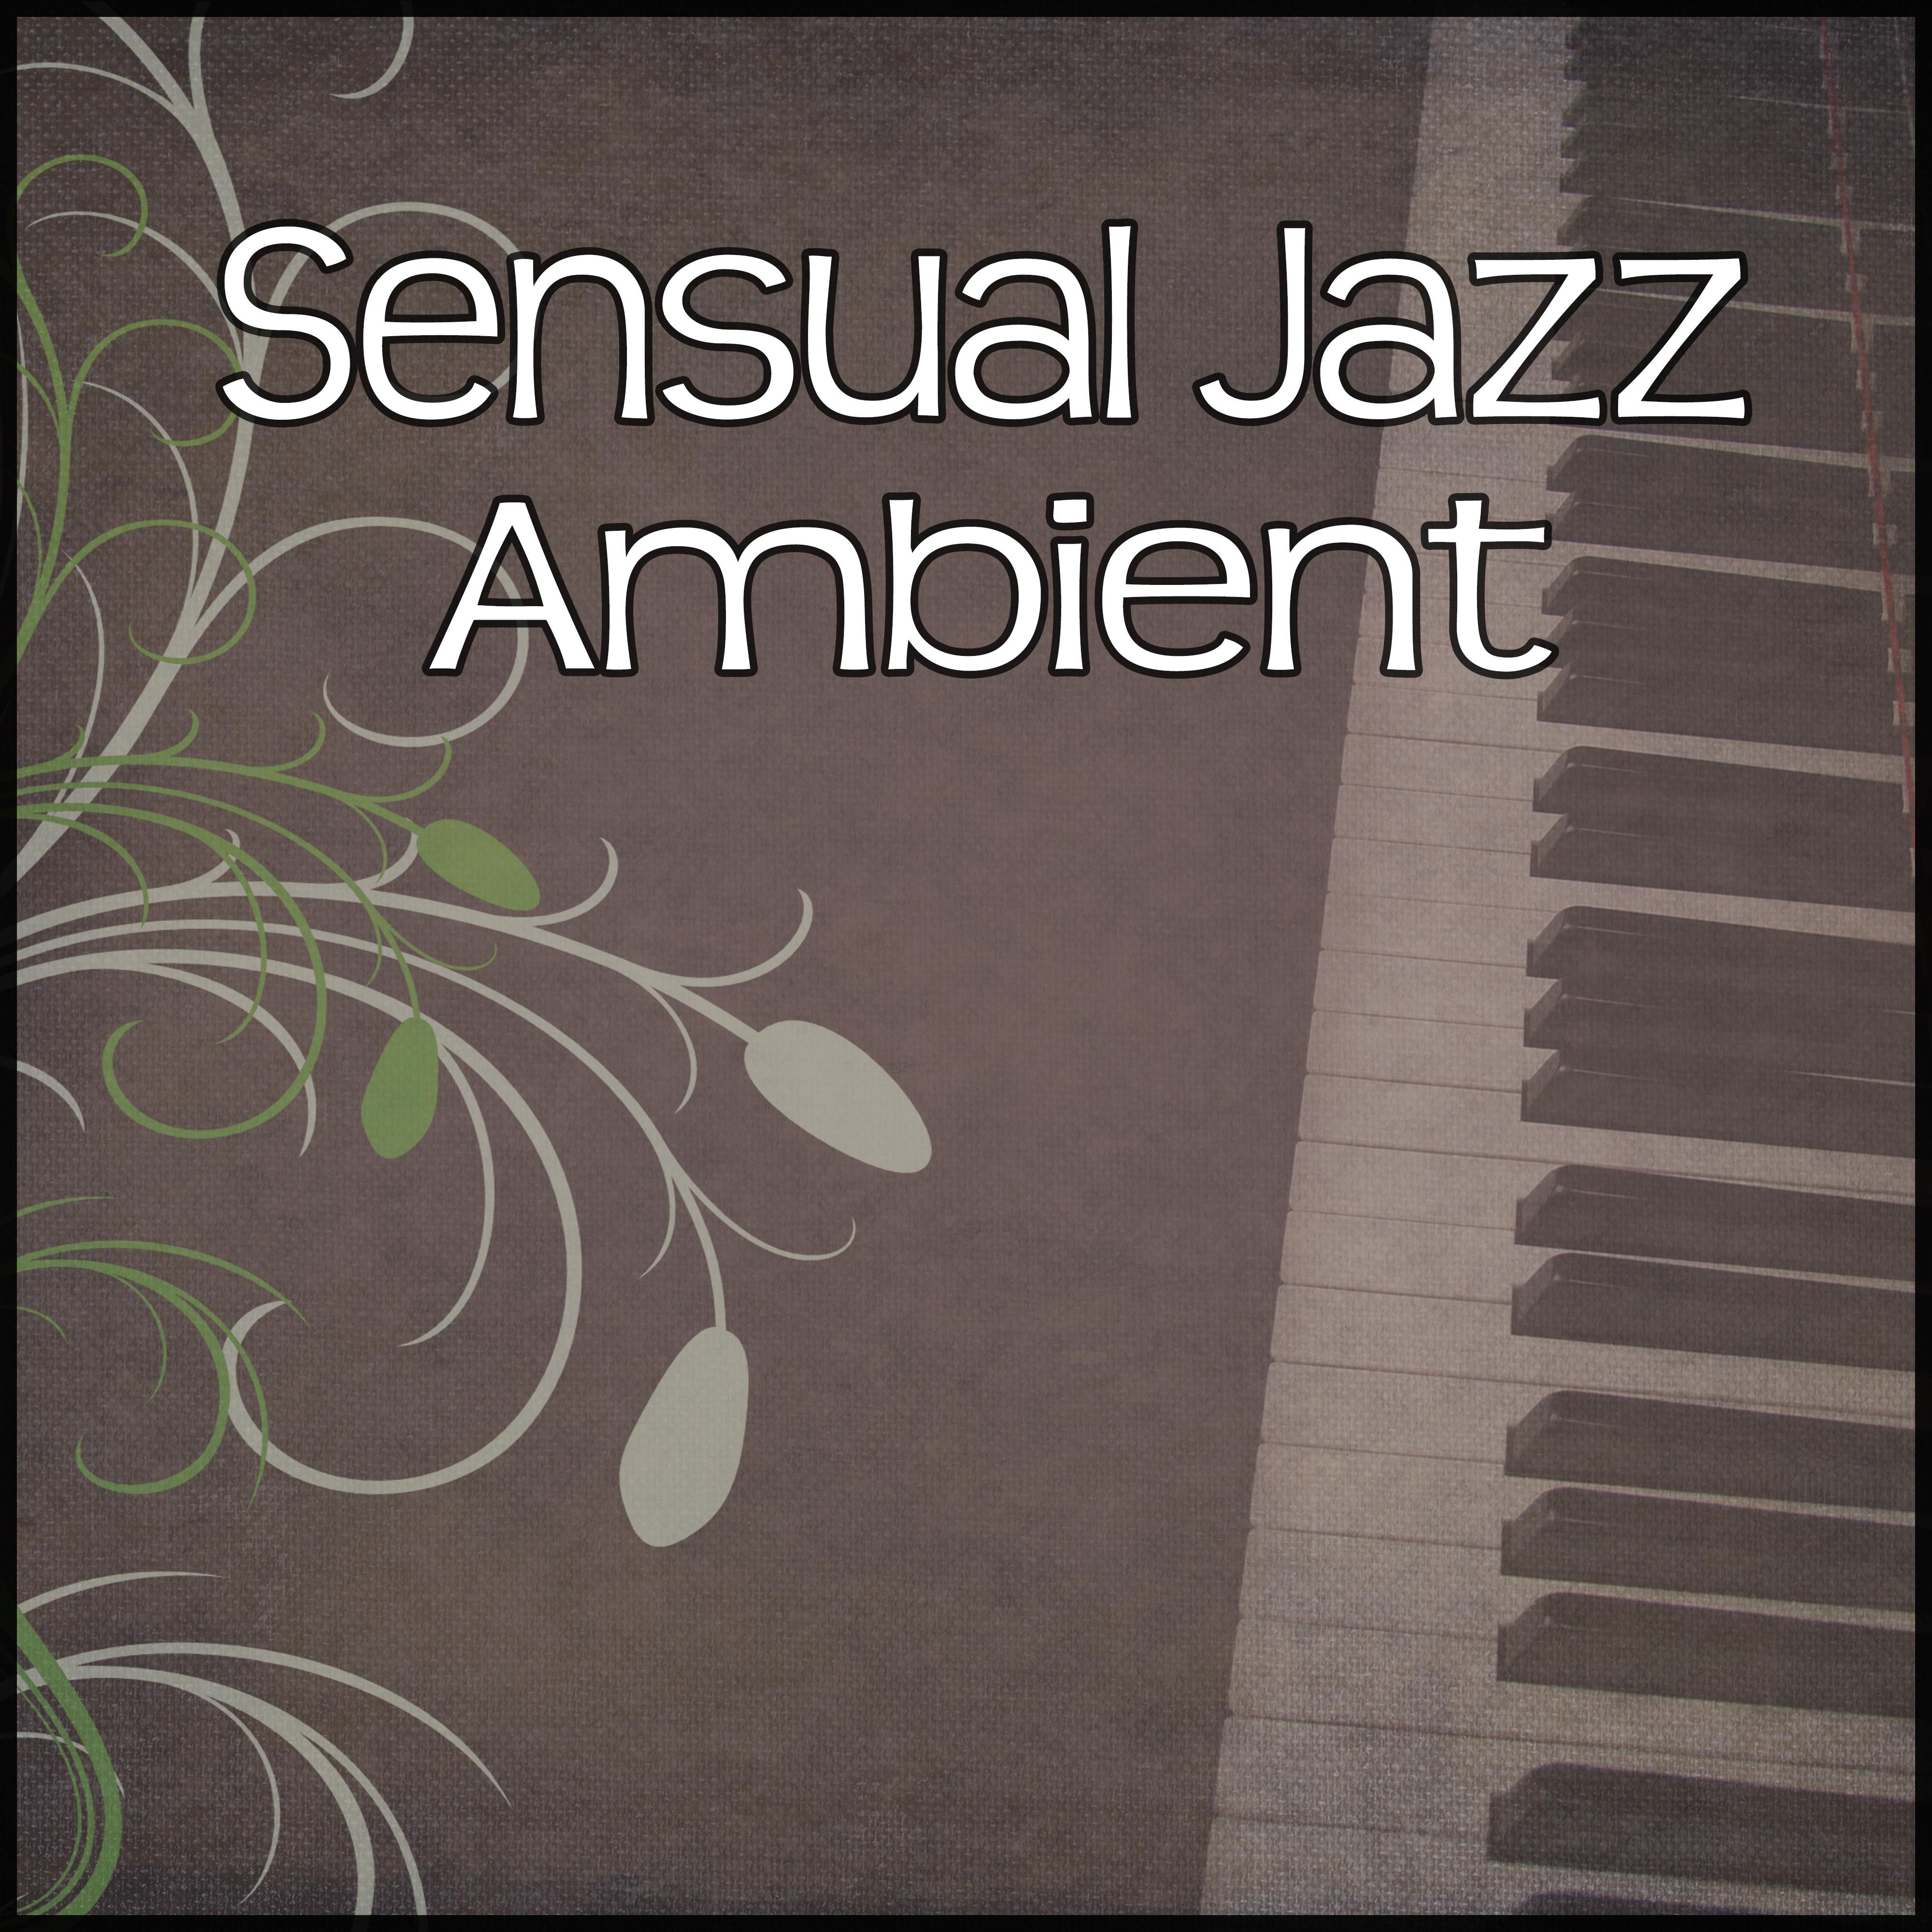 Sensual Jazz Ambient  Soft Piano Music, Jazz Music, Quiet Night, Smooth Jazz Music, Calming Sounds for Relaxation, Background Sounds to Calm Down